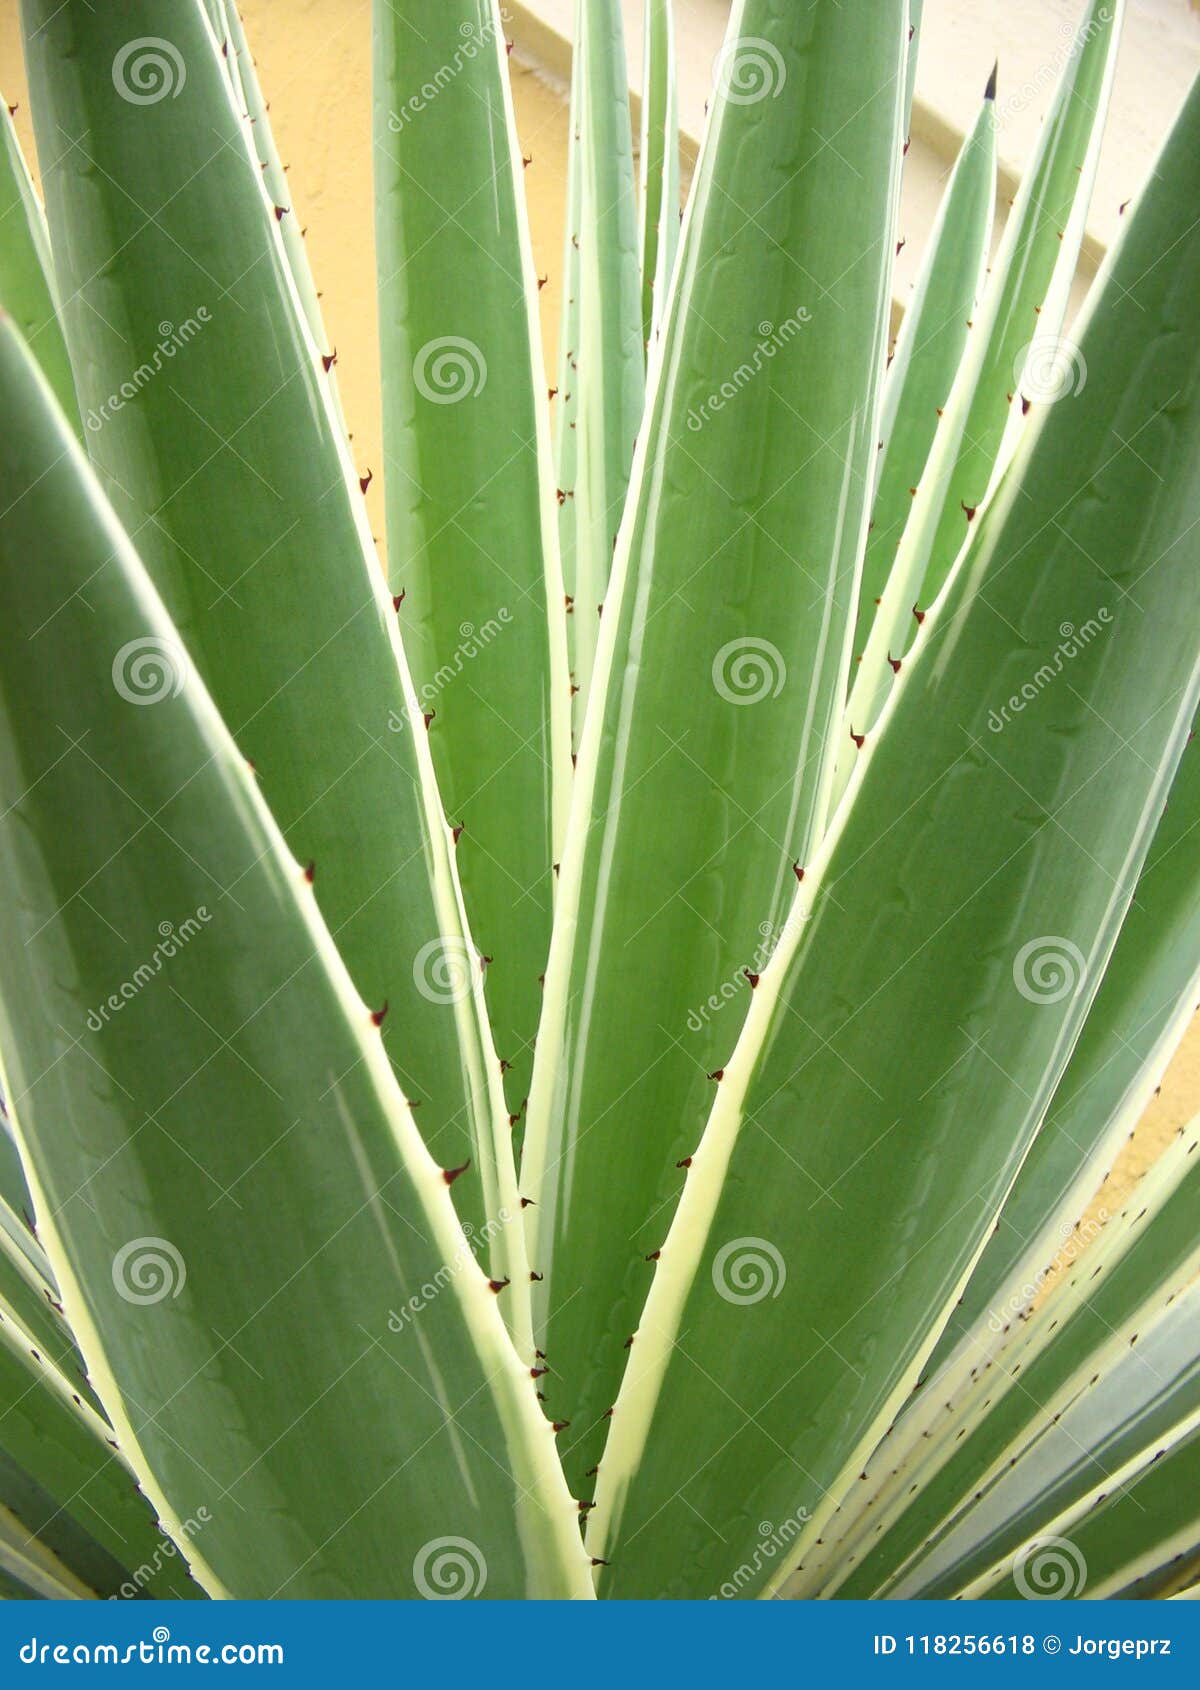 agavaceae agave angustifolia. geometric nature background, plant of branches with thorns in tropical garden.